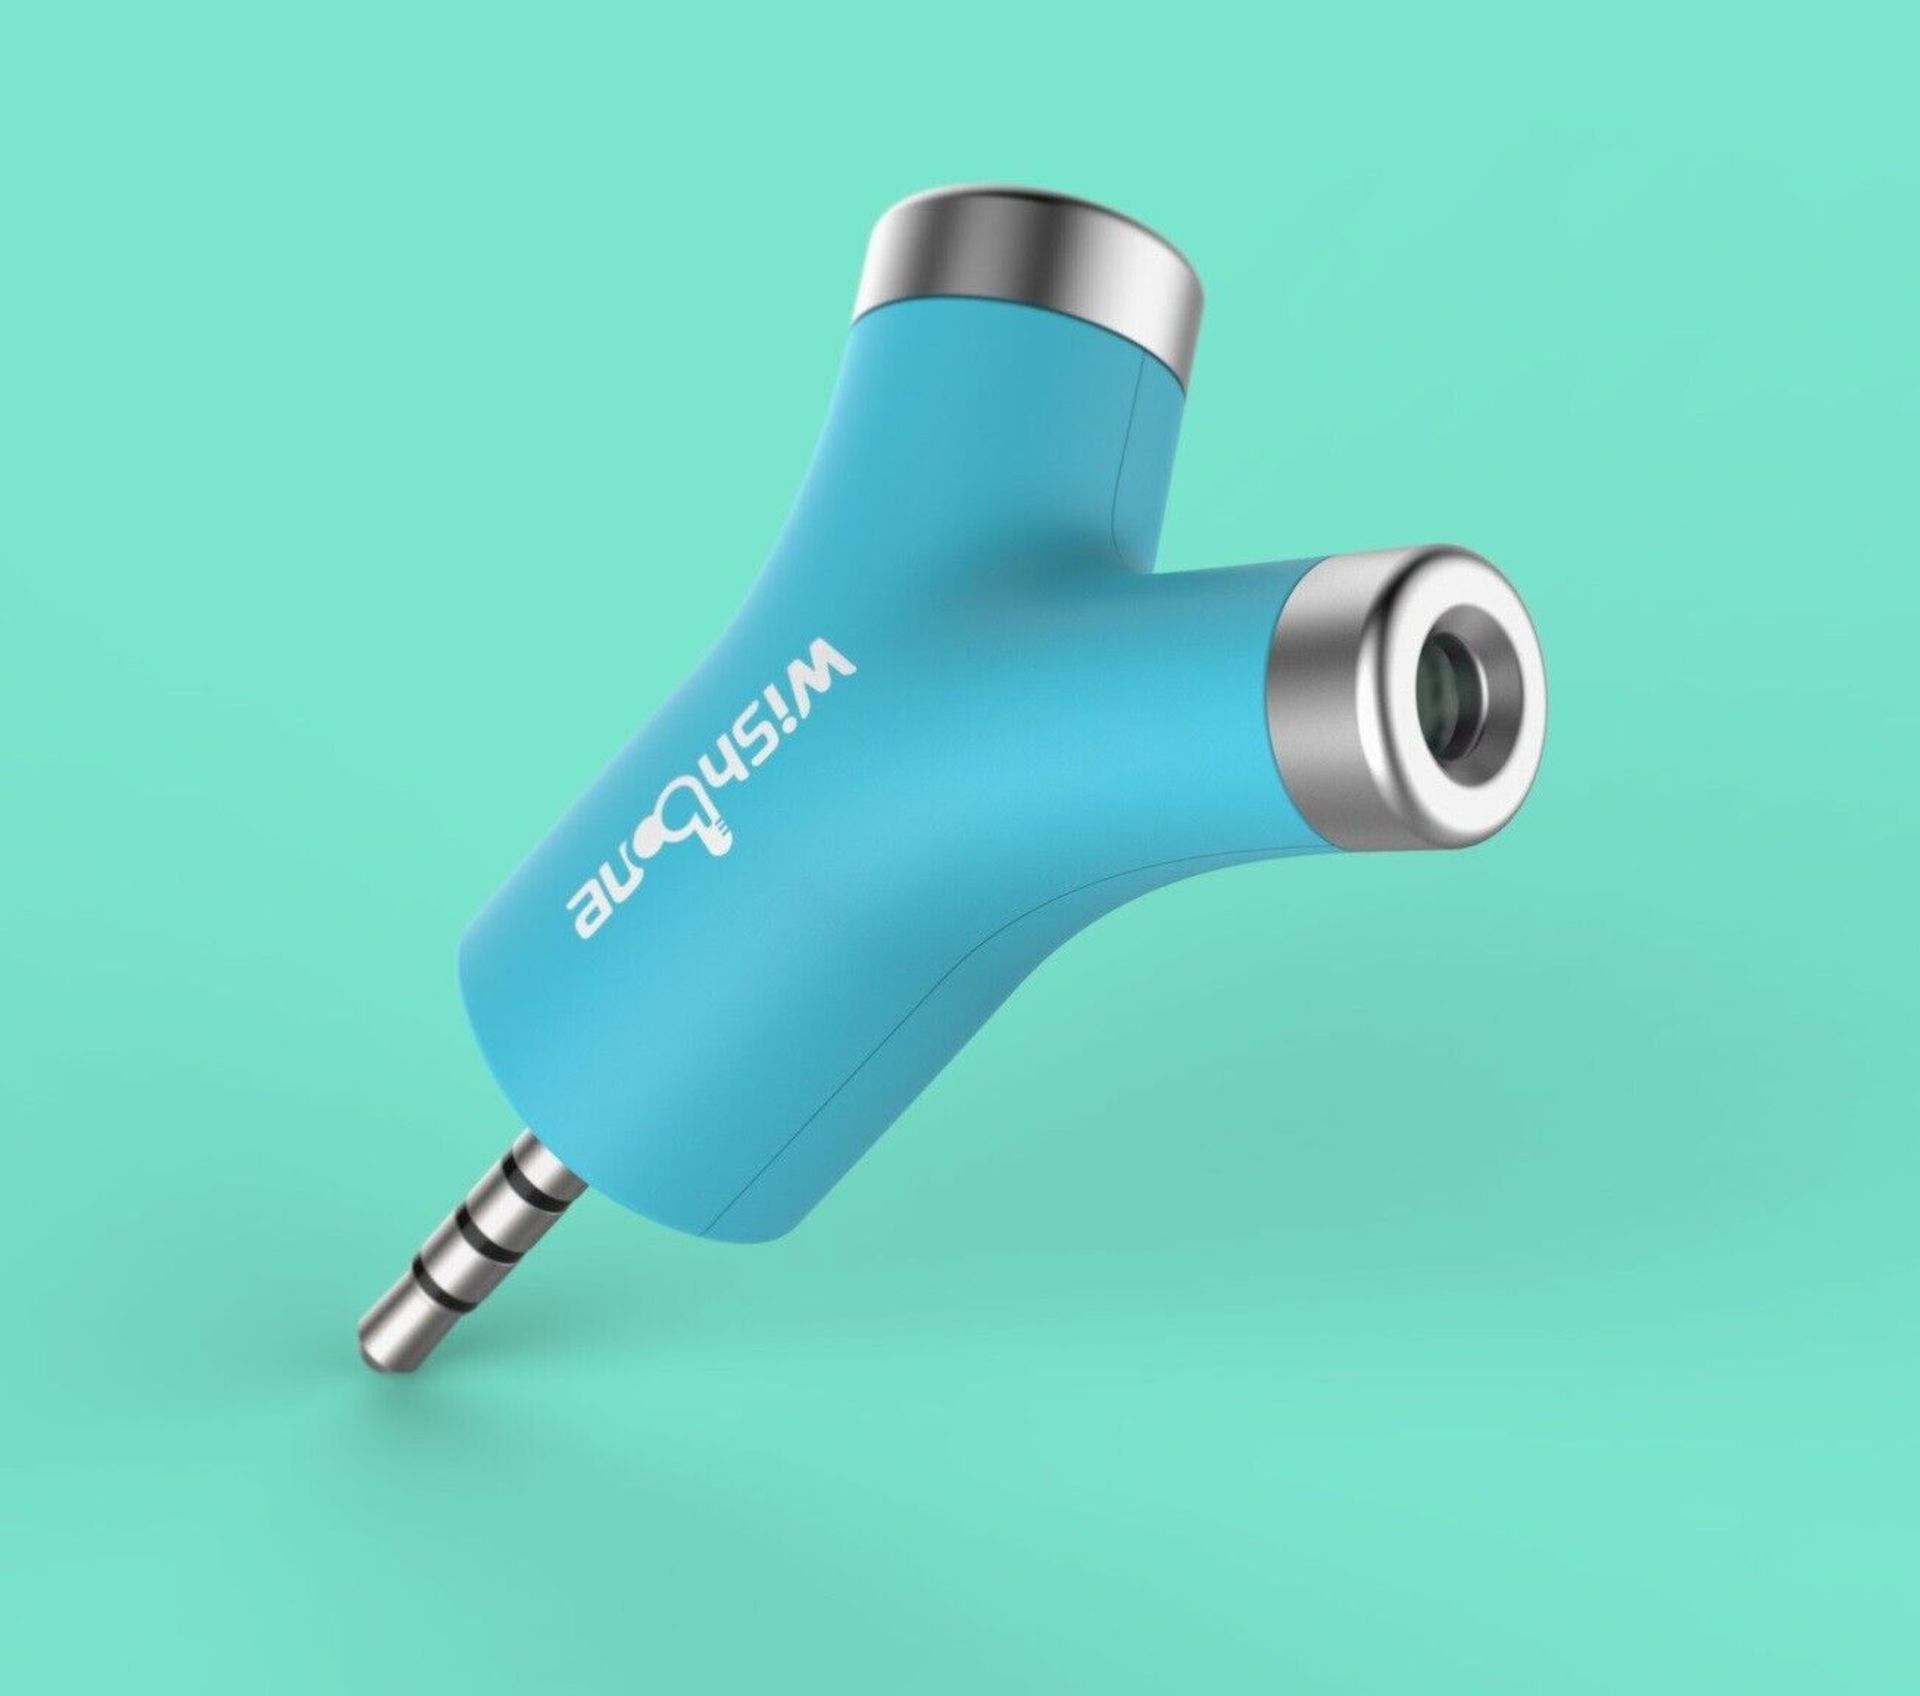 10 x Wishbone: The World's Smallest Smart Thermometer - Non-Contact Thermometer